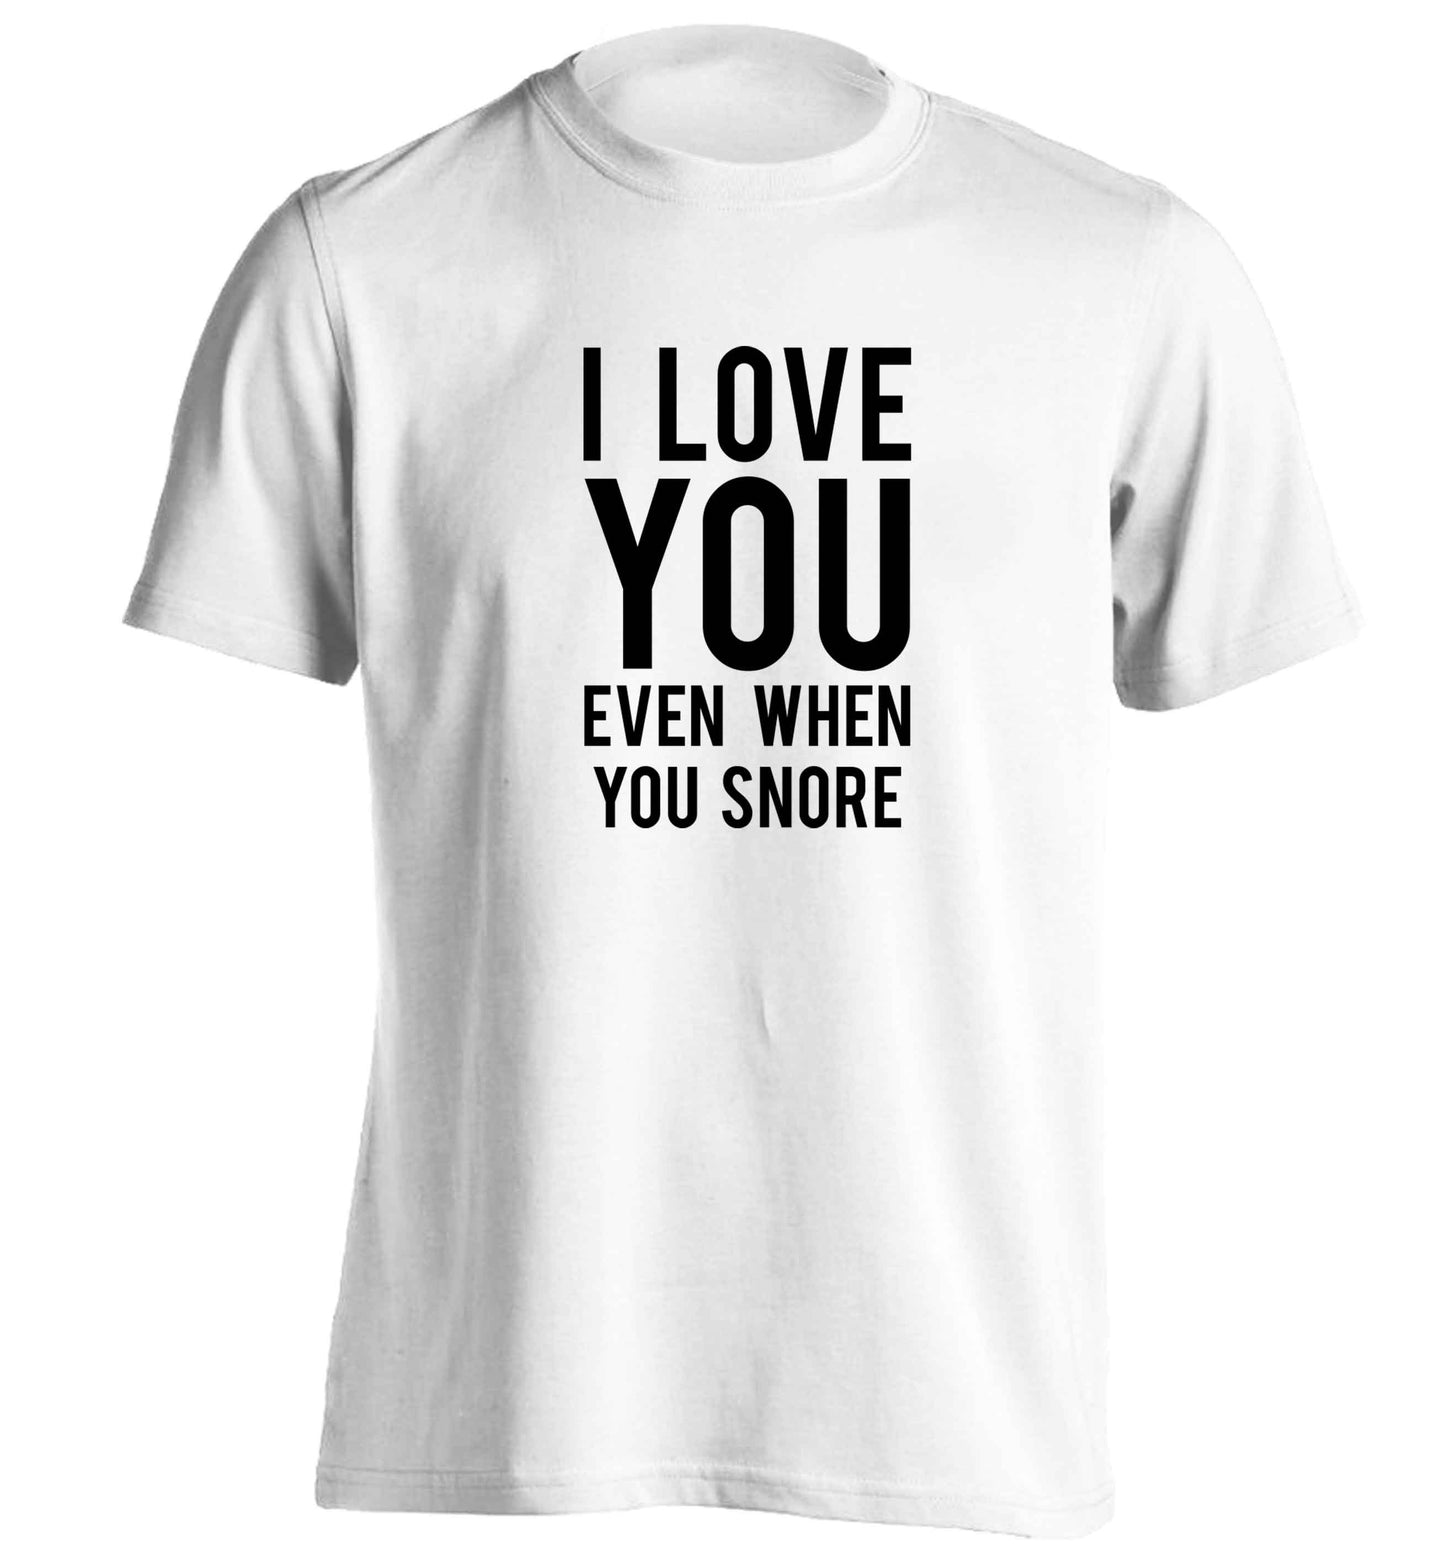 I love you even when you snore adults unisex white Tshirt 2XL